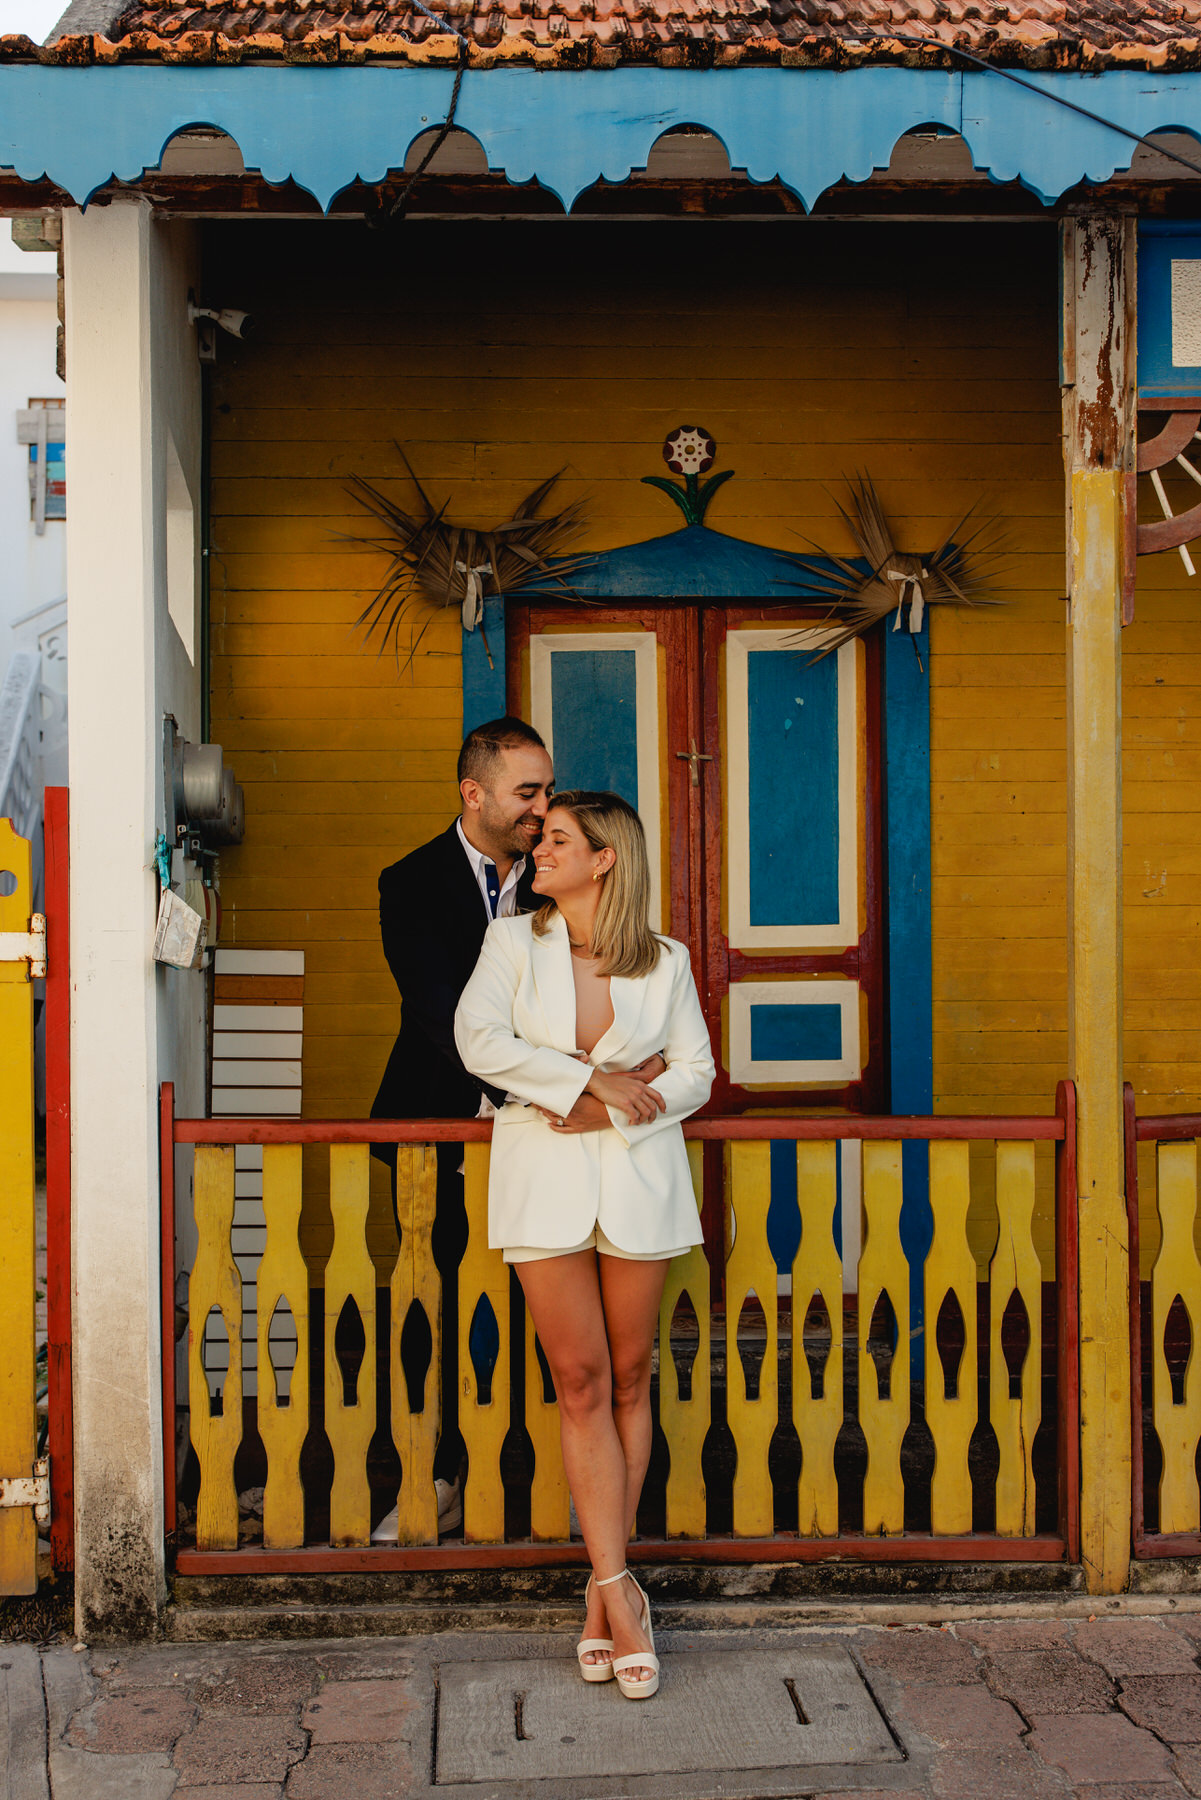 Isla Mujeres photo engagement session by Take it Photo. 